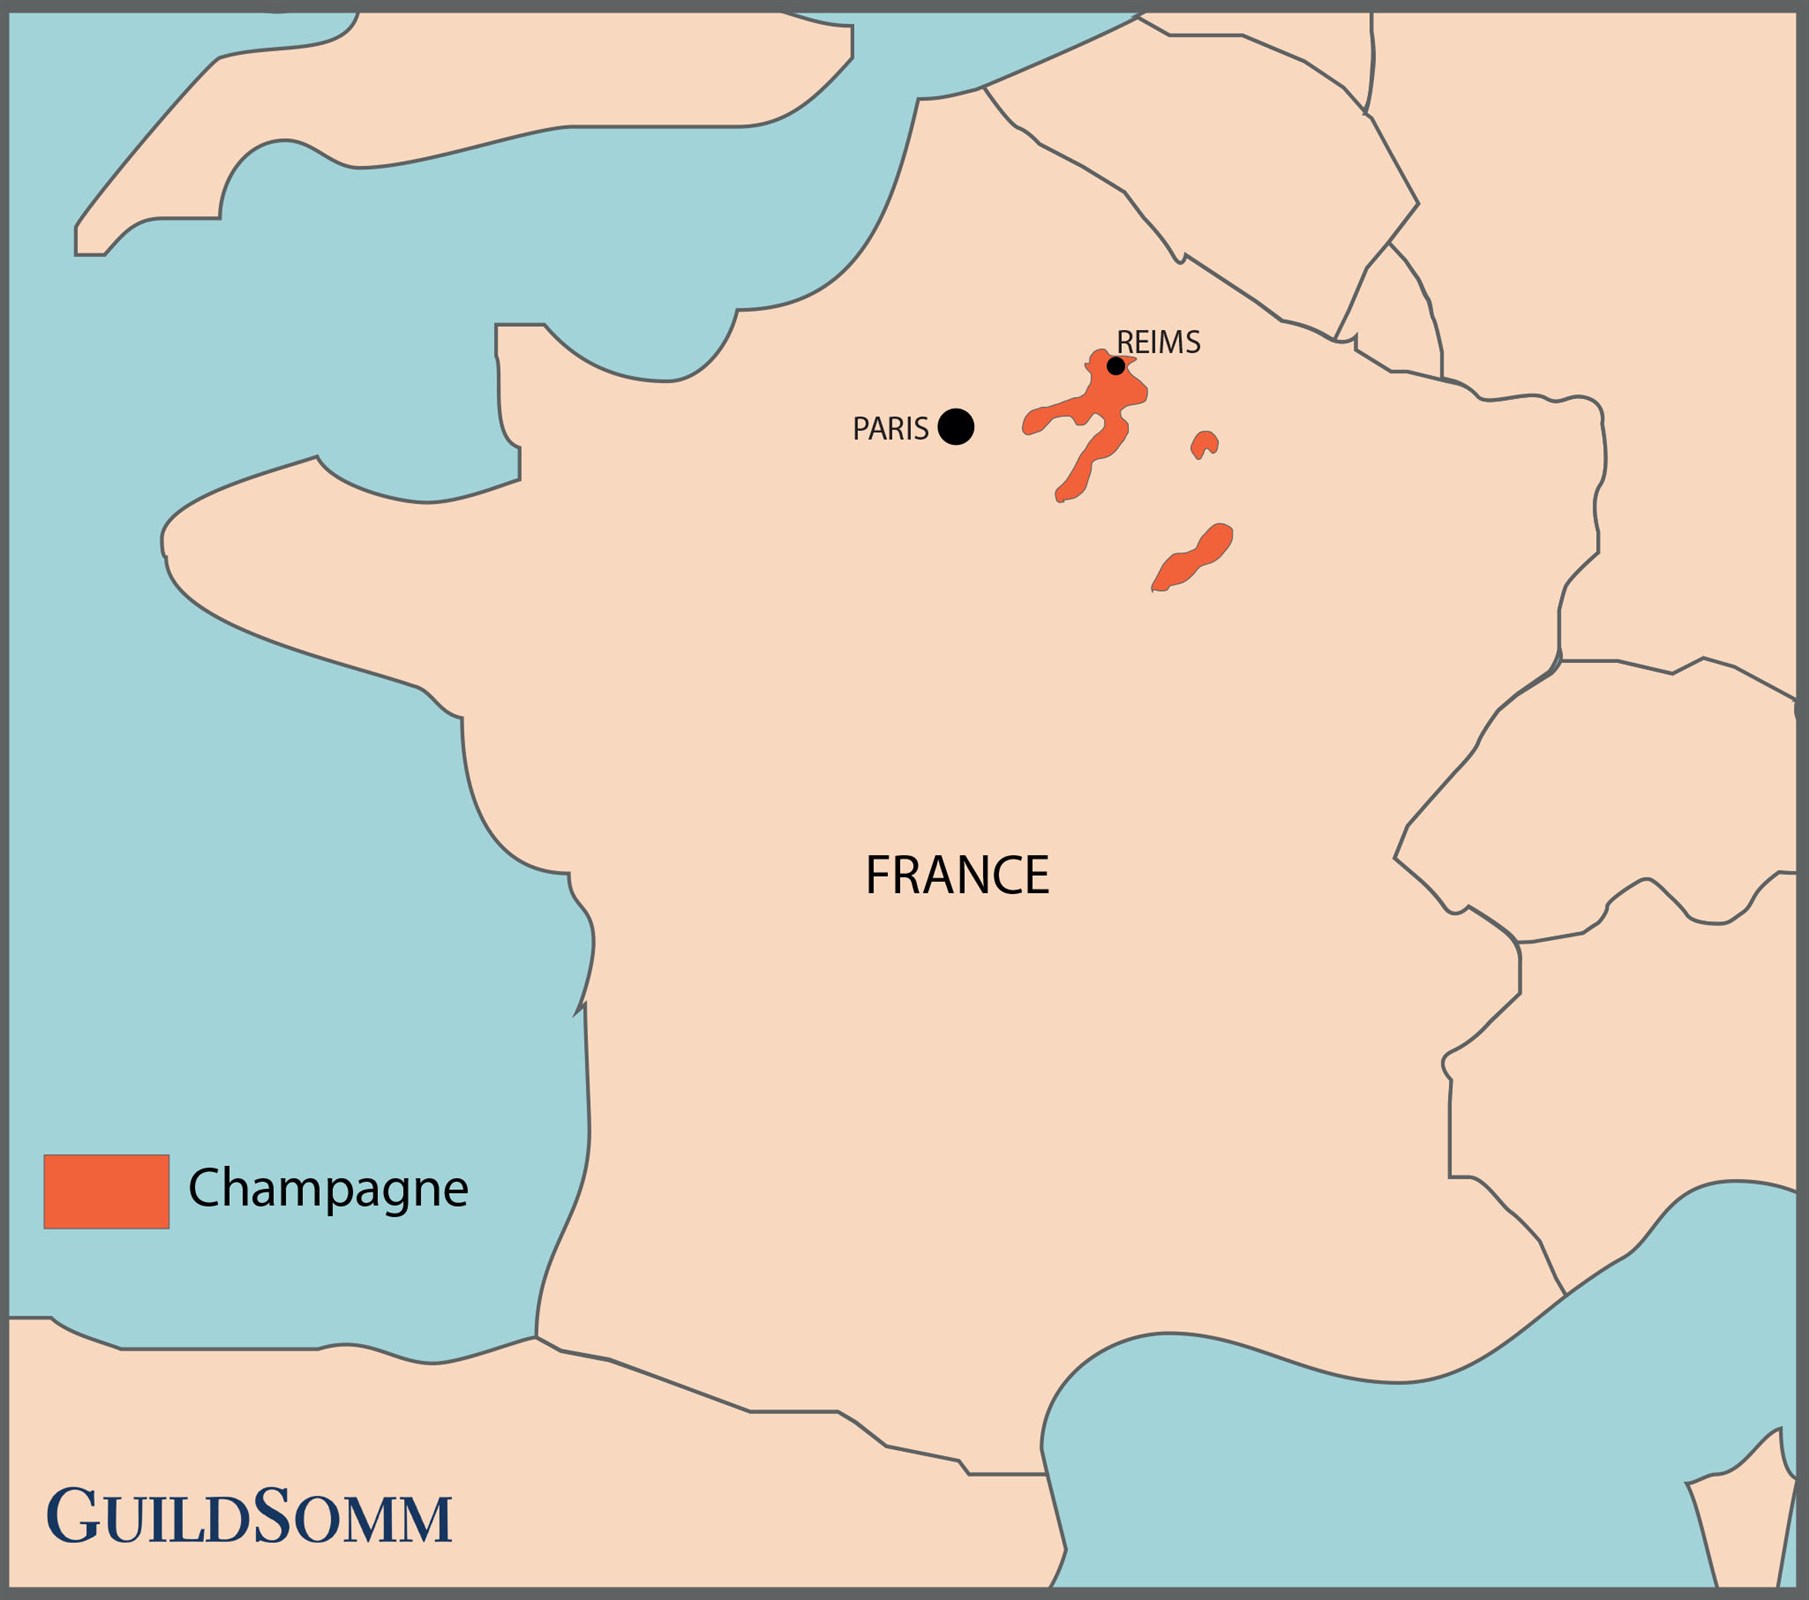 Champagne’s position in France